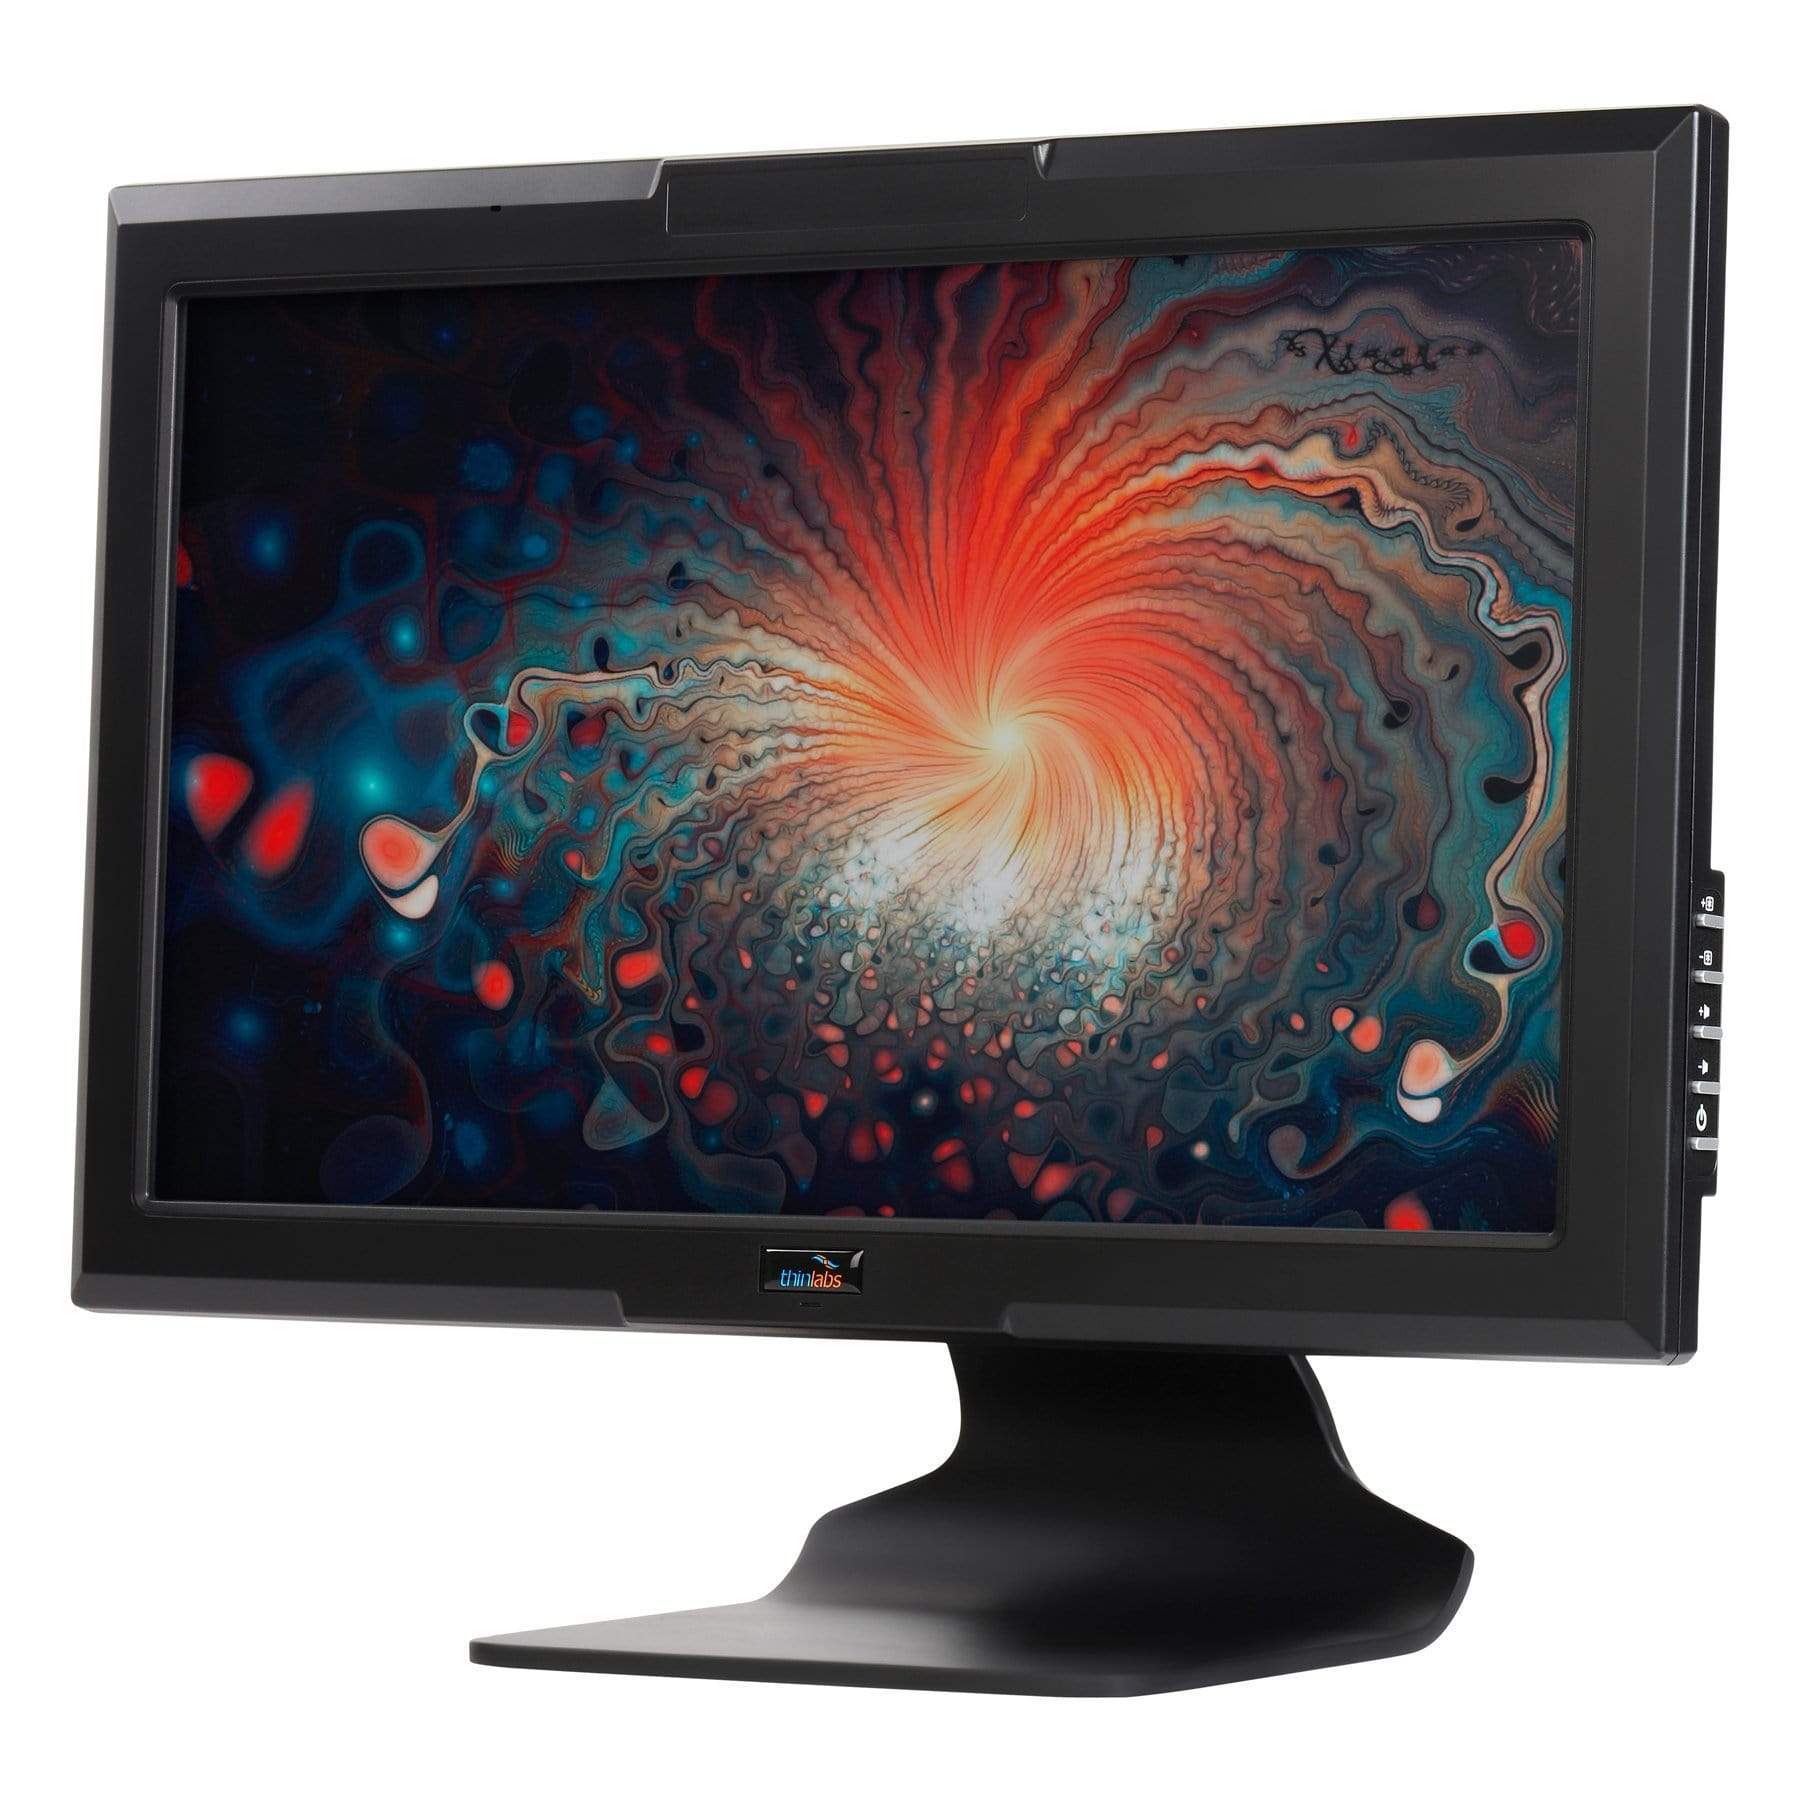 PoE Texas Display HELIOS All-in-One PoE+ pCAP Touchscreen Computer - 19" Wall Mount, 4GB DDR3 RAM, 64GB mSATA